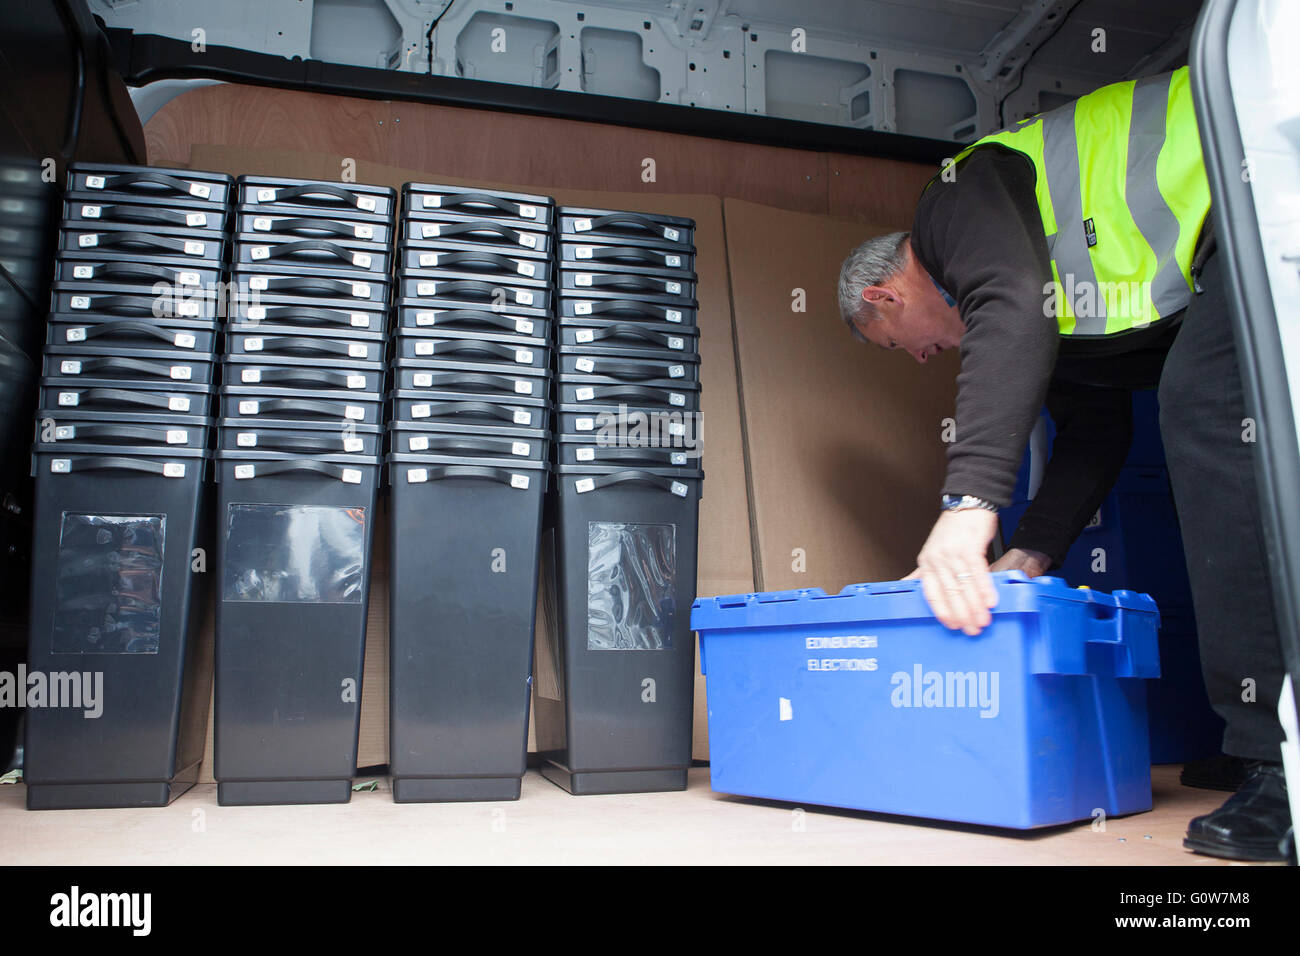 Edinburgh, Scotland UK. 4th May 2016. Ballot boxes to be used for voting in the Scottish Parliament Election are picking up by van from storage for delivery to Edinburgh’s polling places. Pako Mera/Alamy Live News. Stock Photo